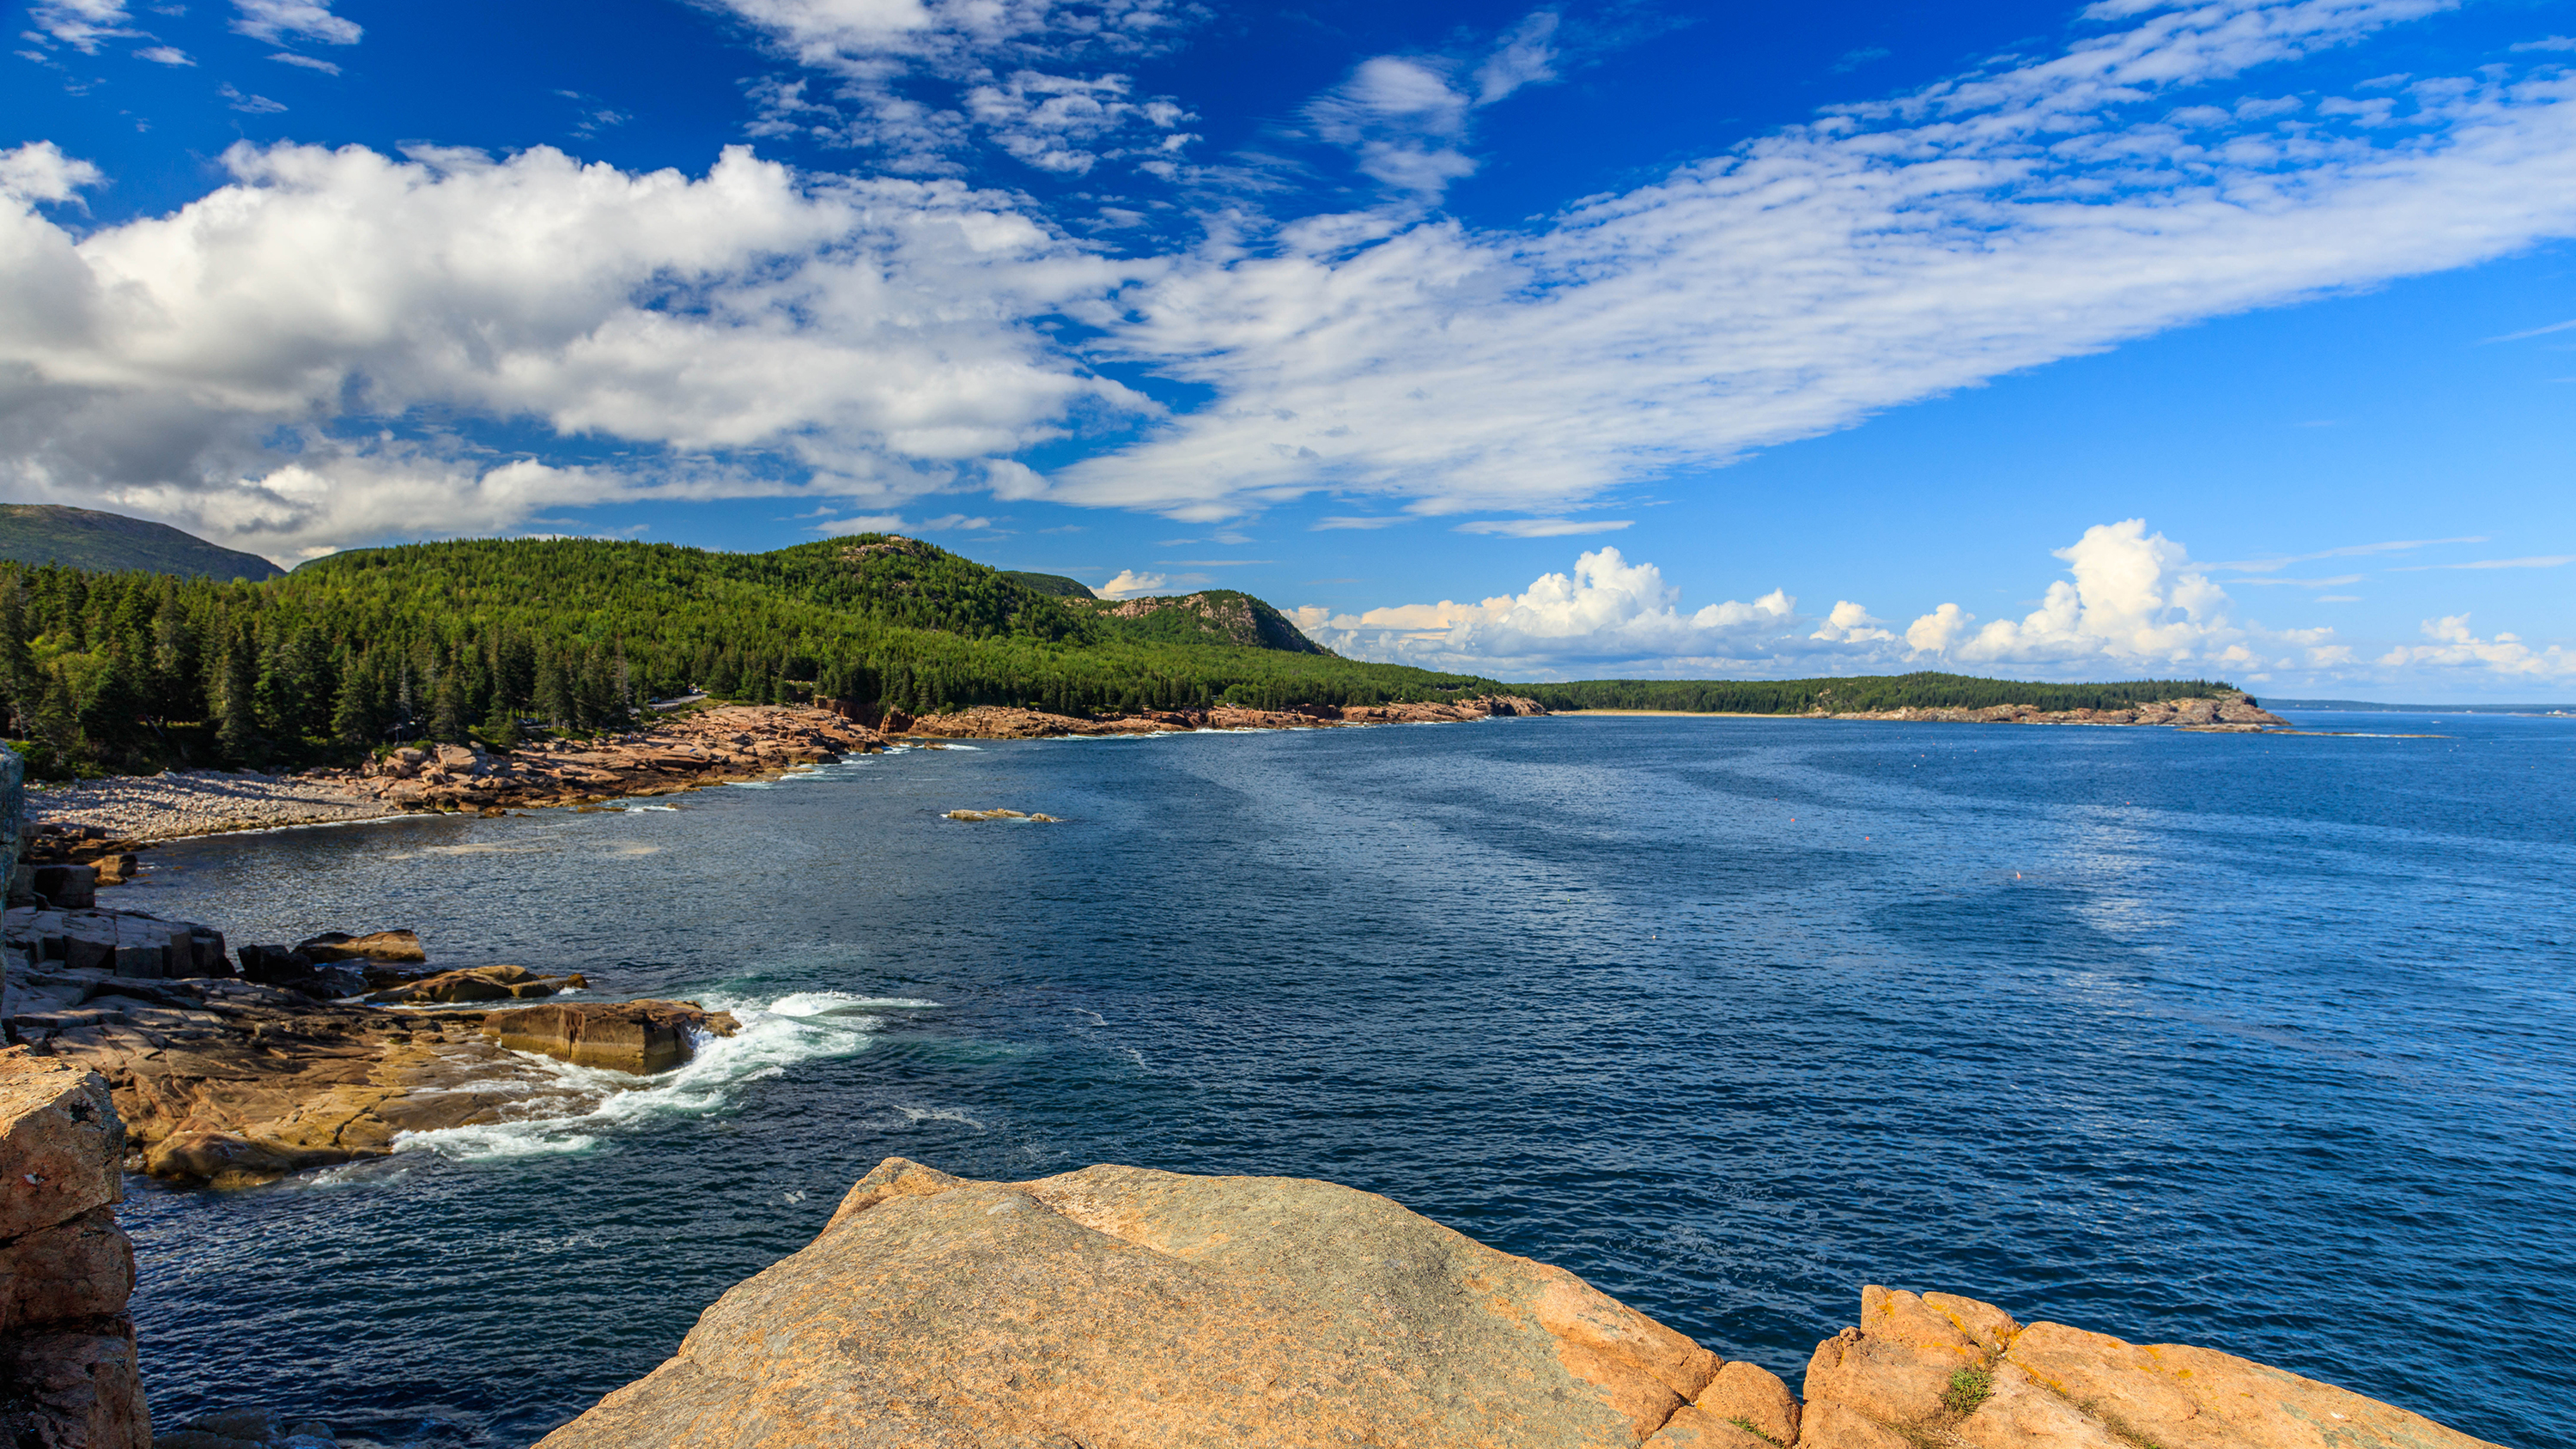 Large puffy clouds dot a brilliant blue sky as wave crash against the rocky coastline of Acadia.